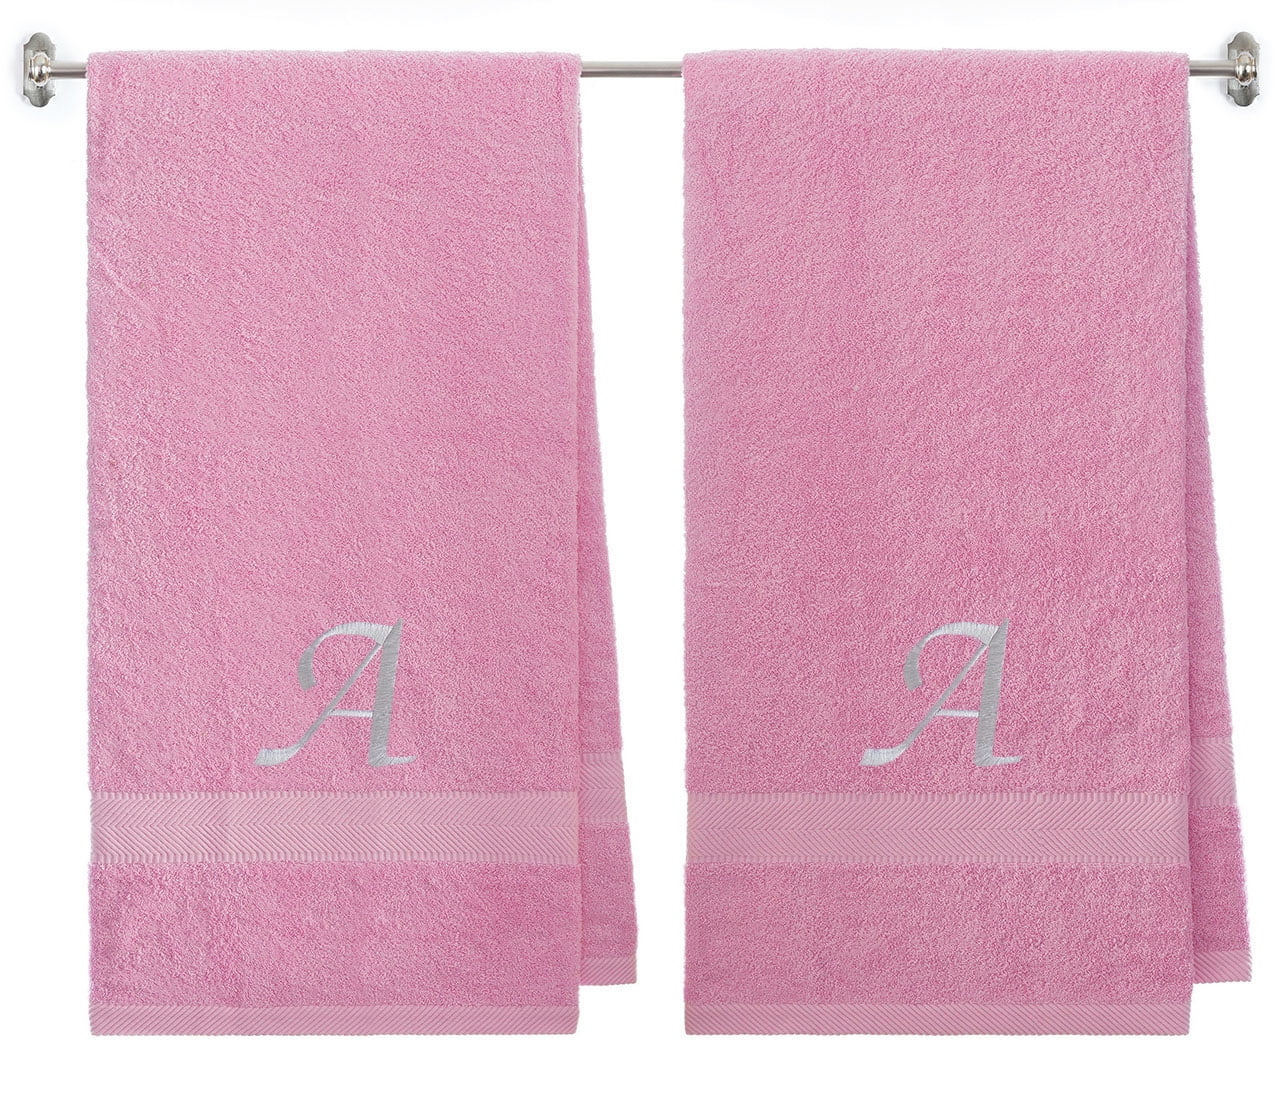 New EMBROIDERED PERSONALISED NAME BATH TOWEL Gift Set ANY NAME Combet Cotton 